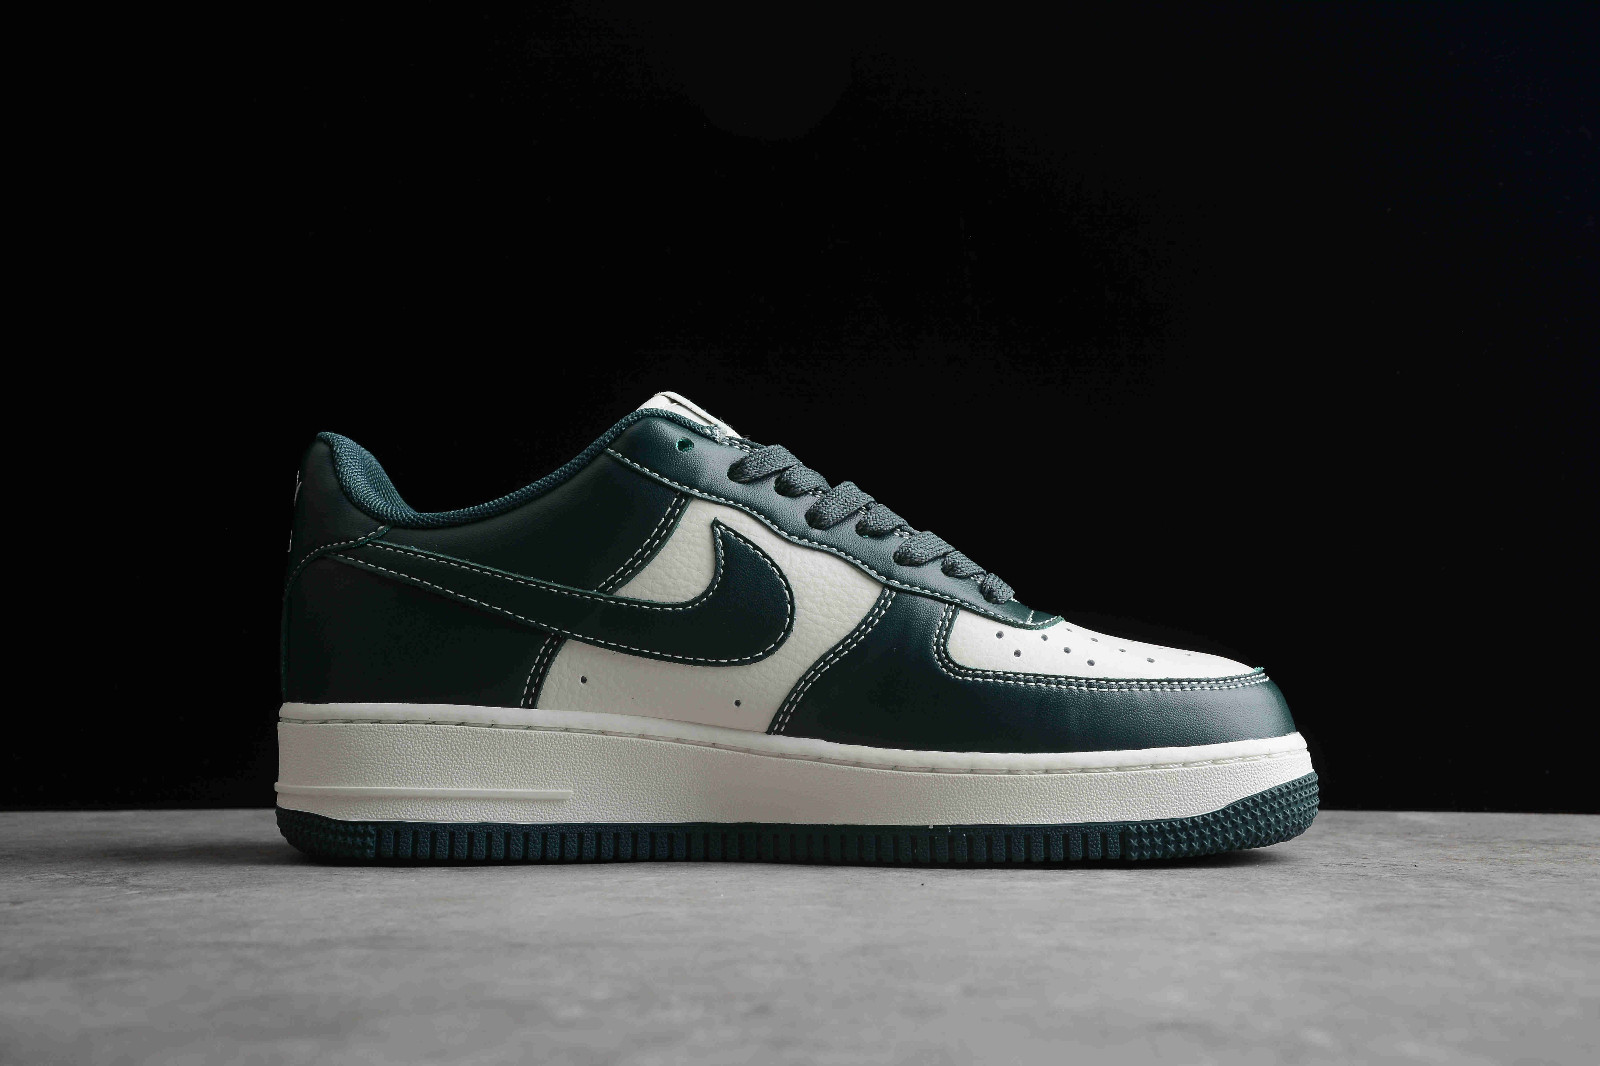 GmarShops - Nike Air Force 1 07 Low Hoops Off White Light Green